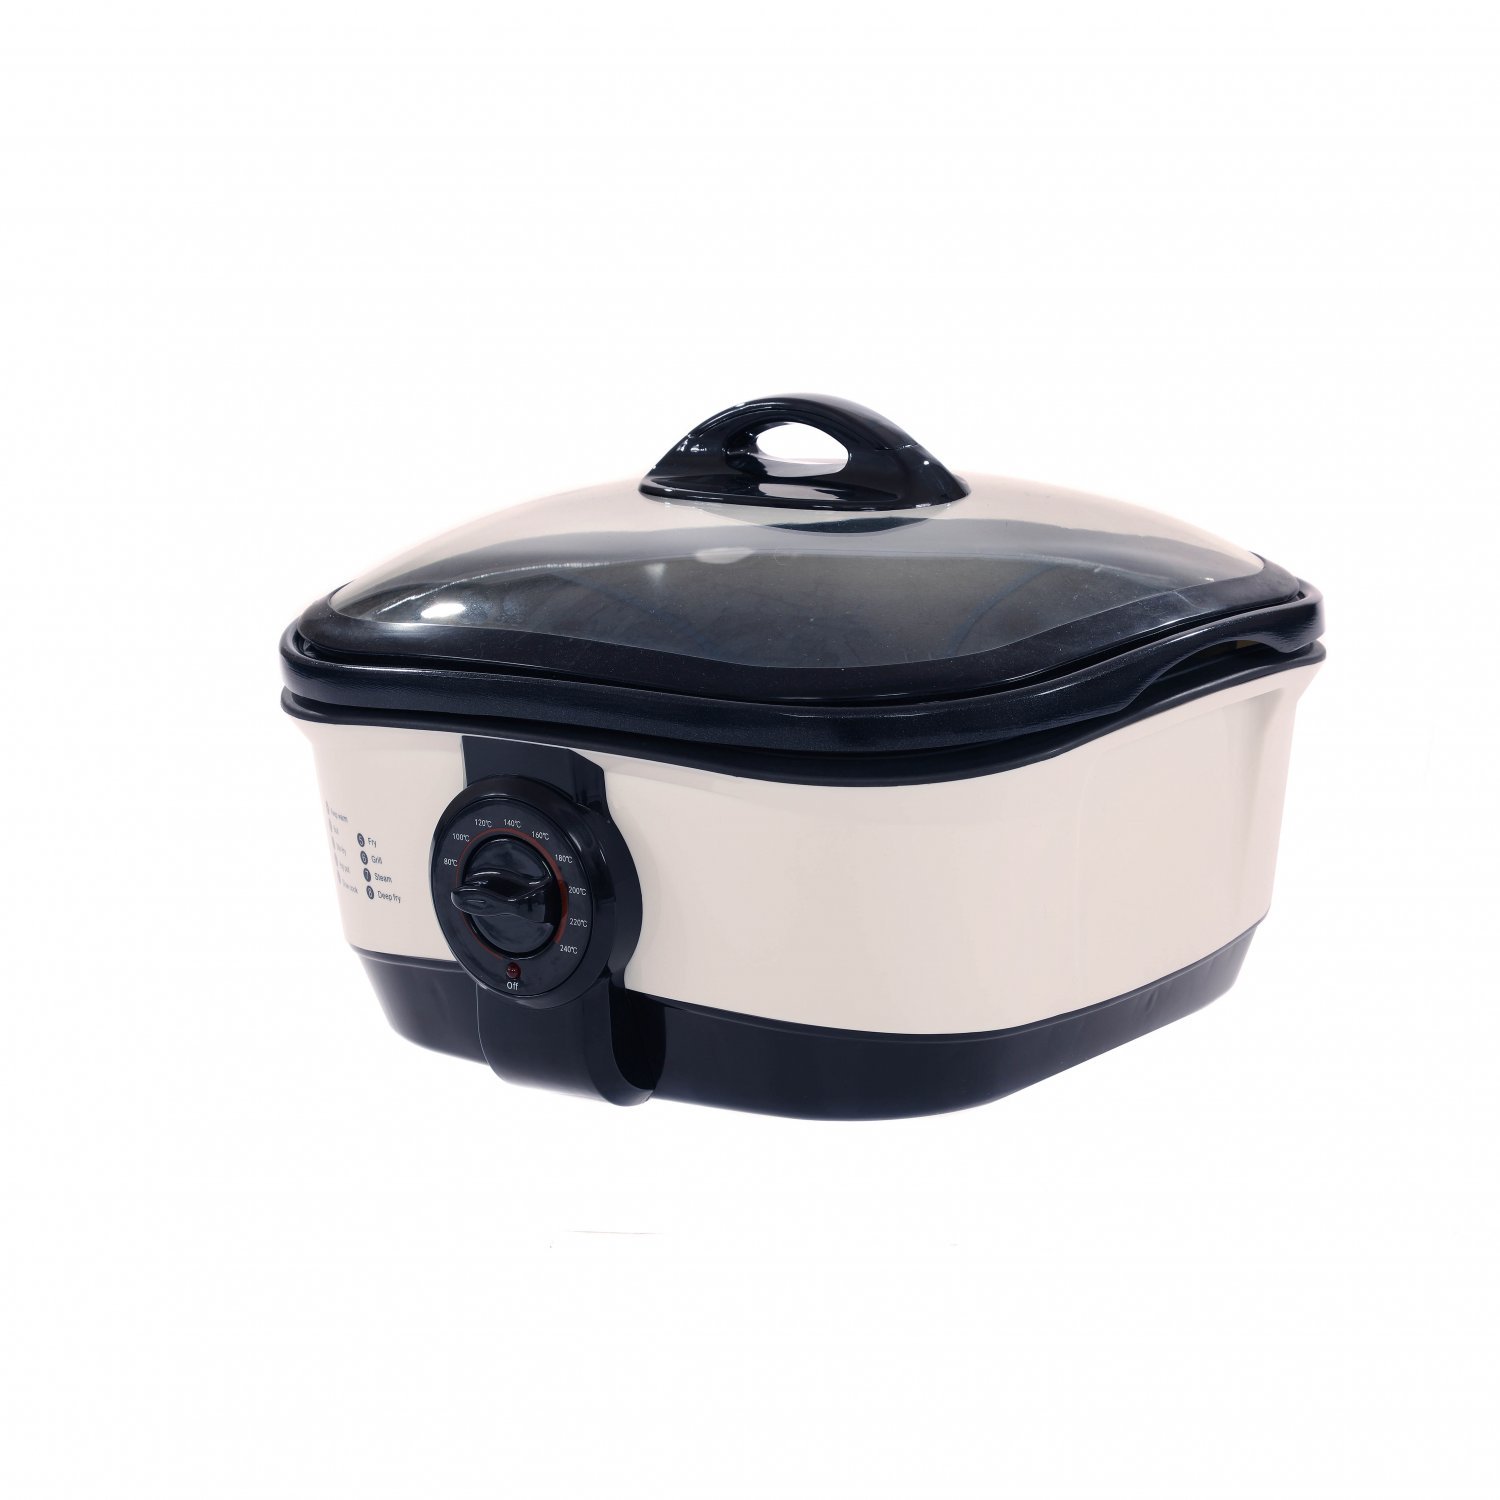 8-in-1 1400W Multi Function 5L Slow Cooker Fry Steam Grill Oven